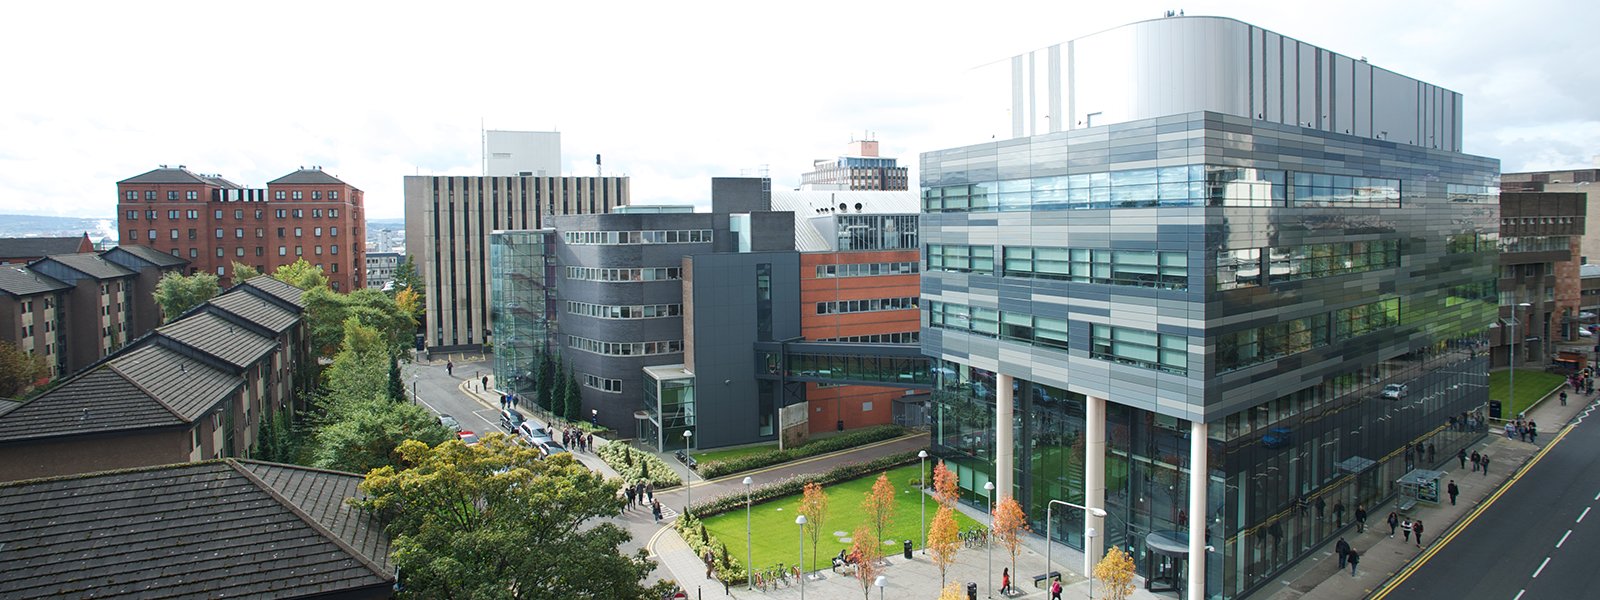 Strathclyde Institute of Pharmacy and Biomedical Sciences (SIPBS) building